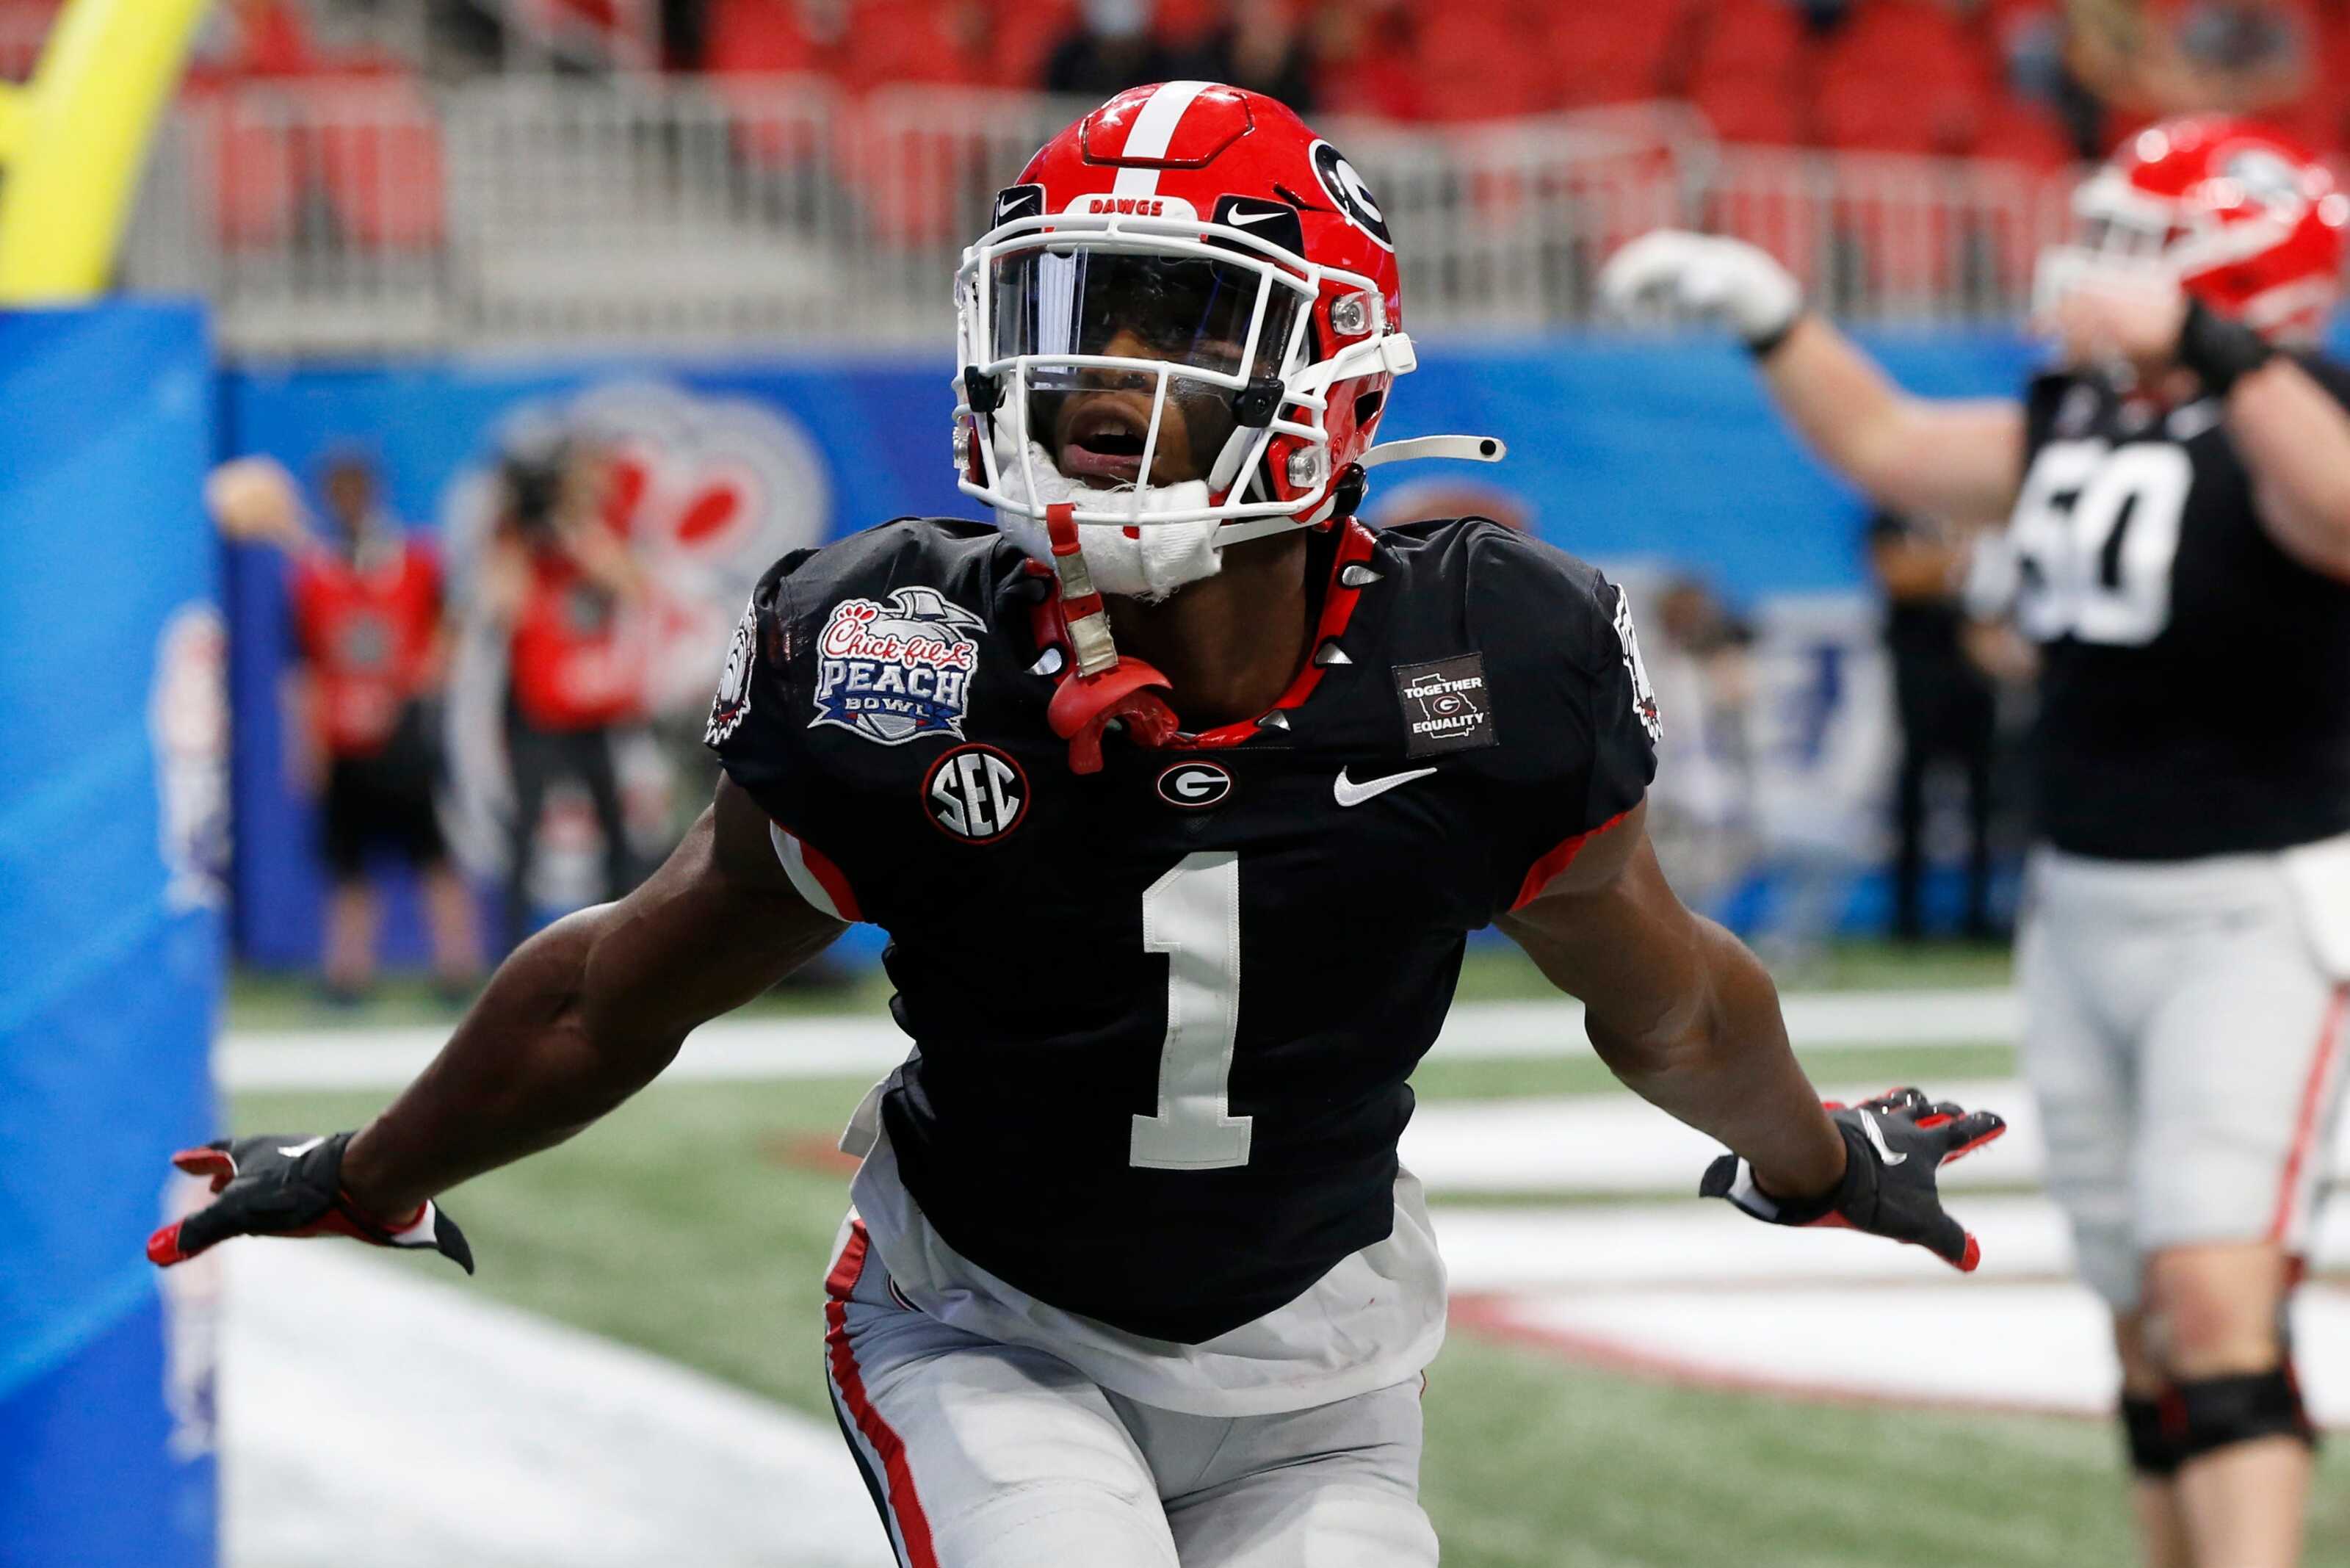 Georgia football may see George Pickens win Offensive Rookie of the Year